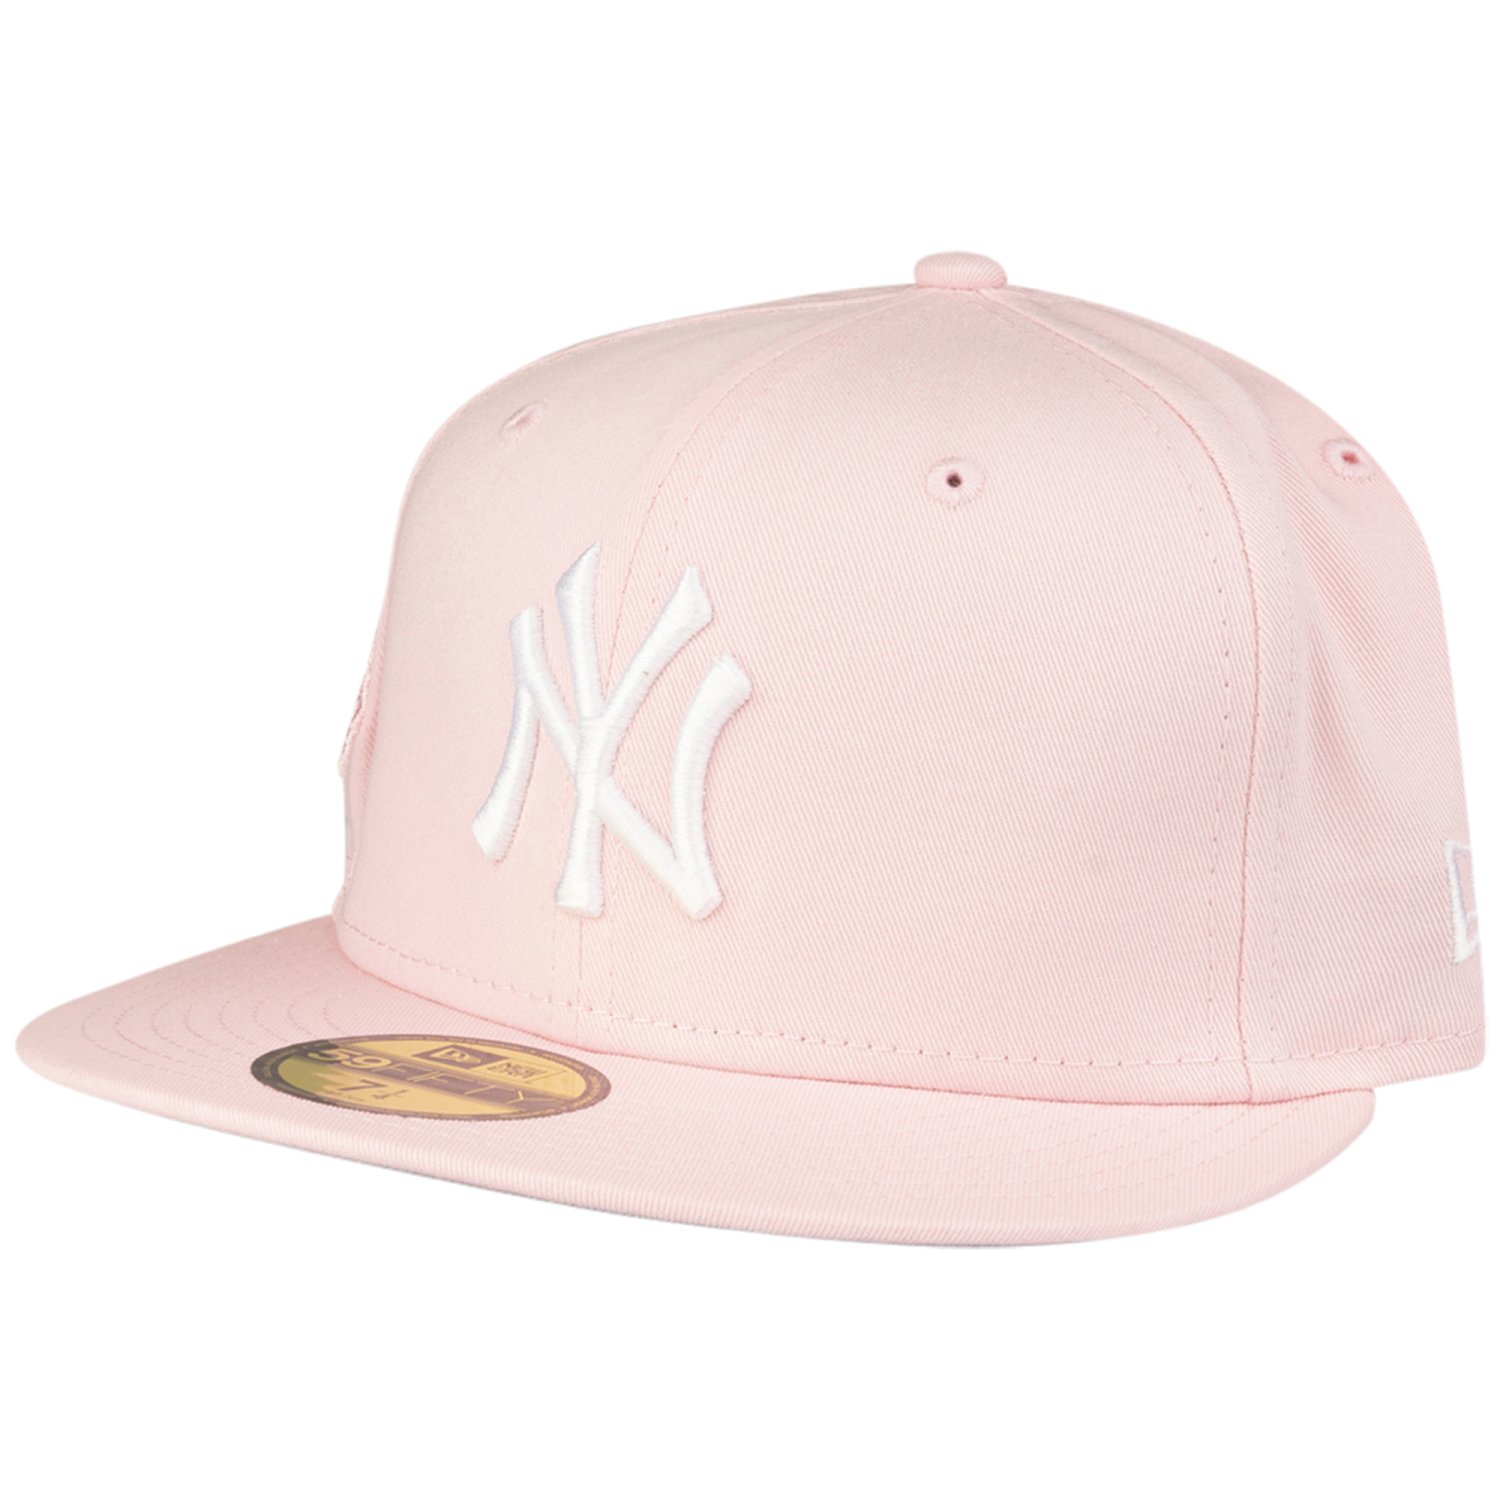 New Era 59Fifty Fitted Cap - 100 ANNIVERSARY NY Yankees pink | Fitted ...